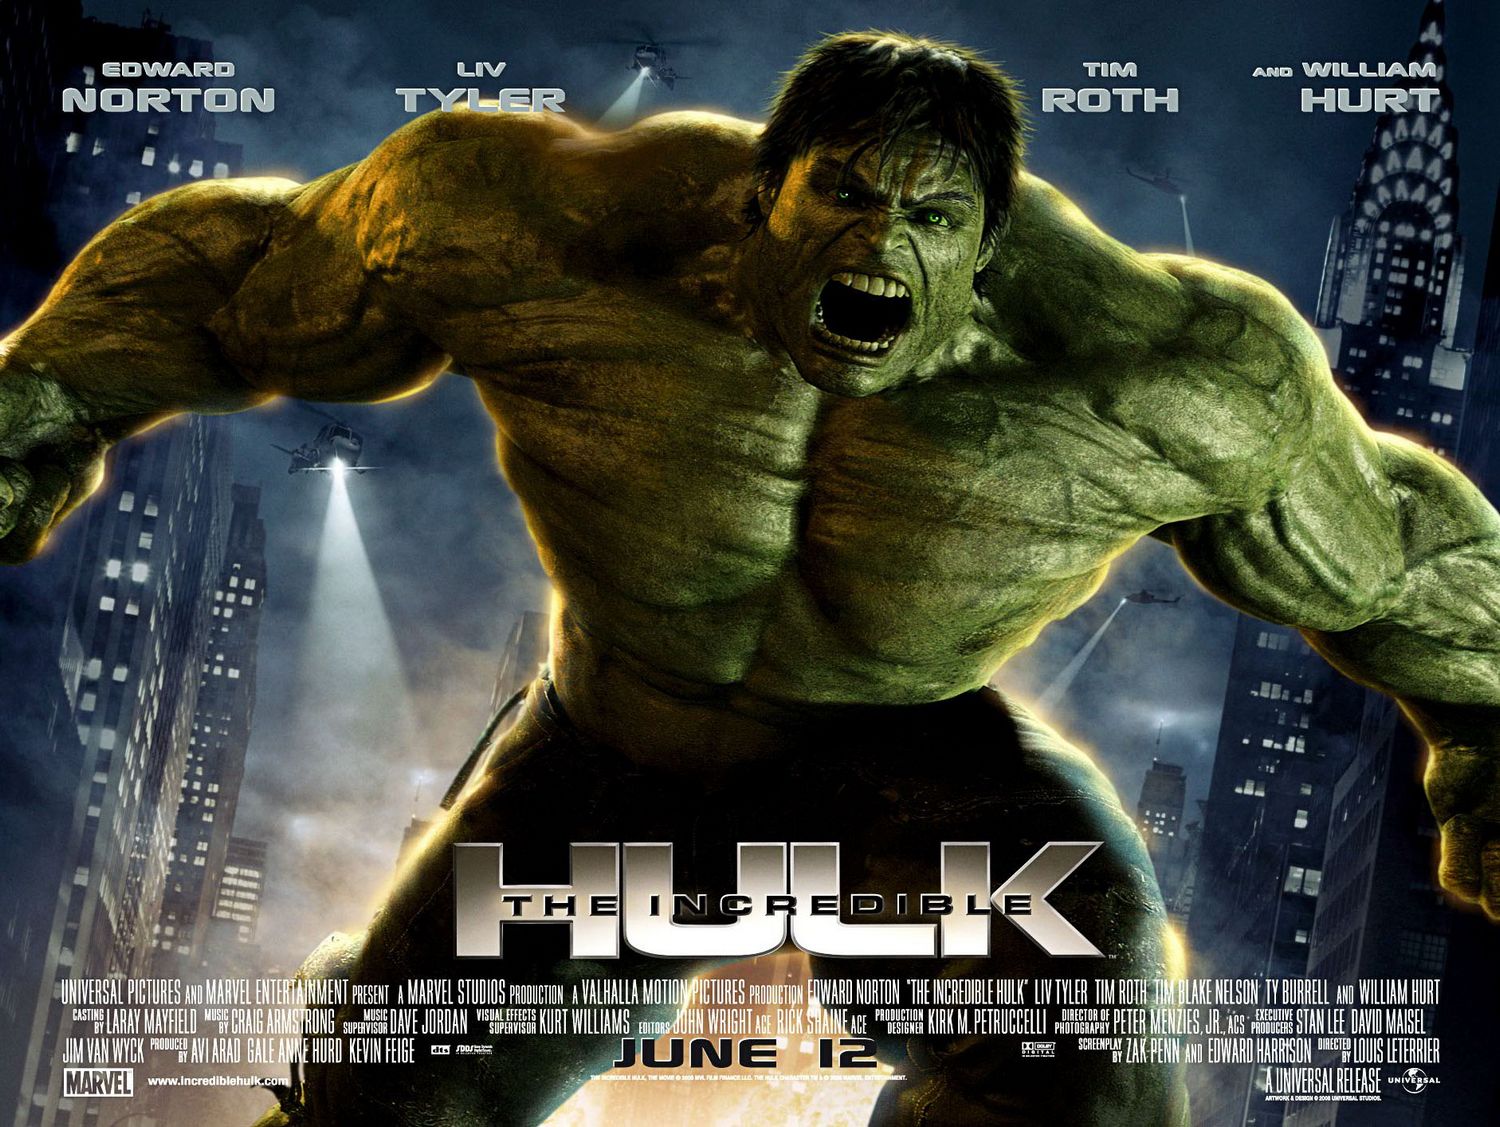 Extra Large Movie Poster Image for The Incredible Hulk (#2 of 2)